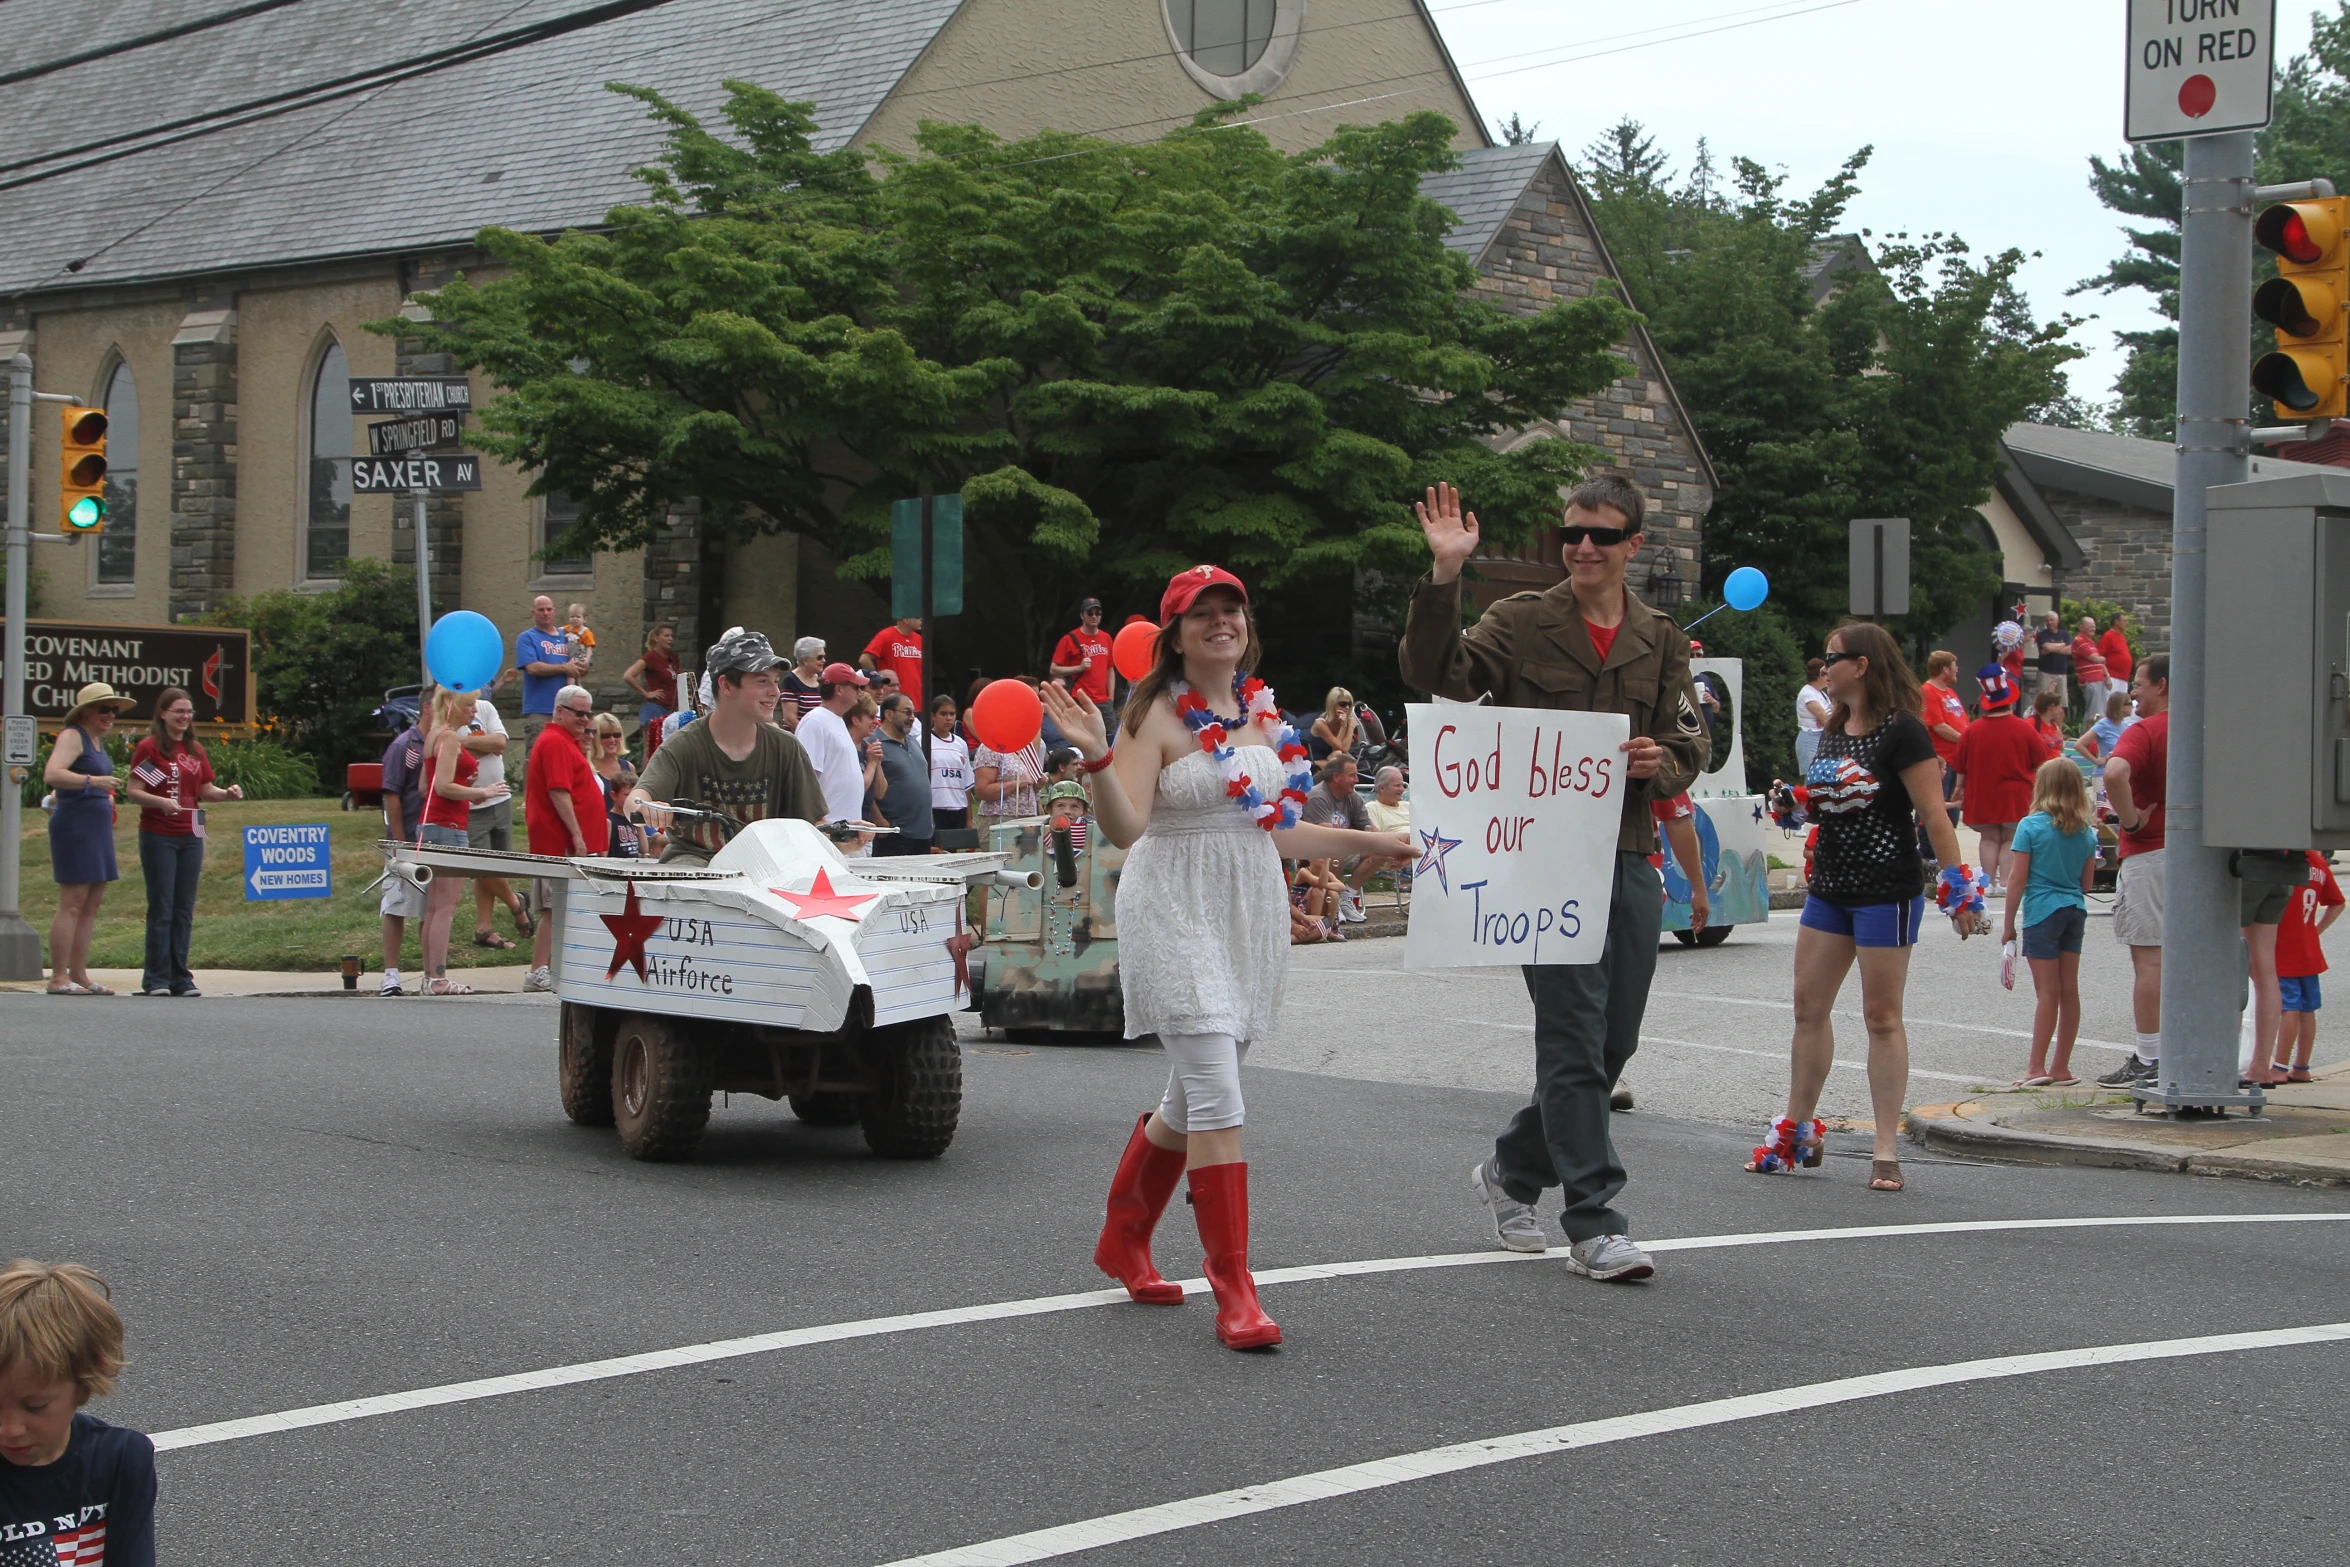 people in costumes are at an intersection, as other people hold signs